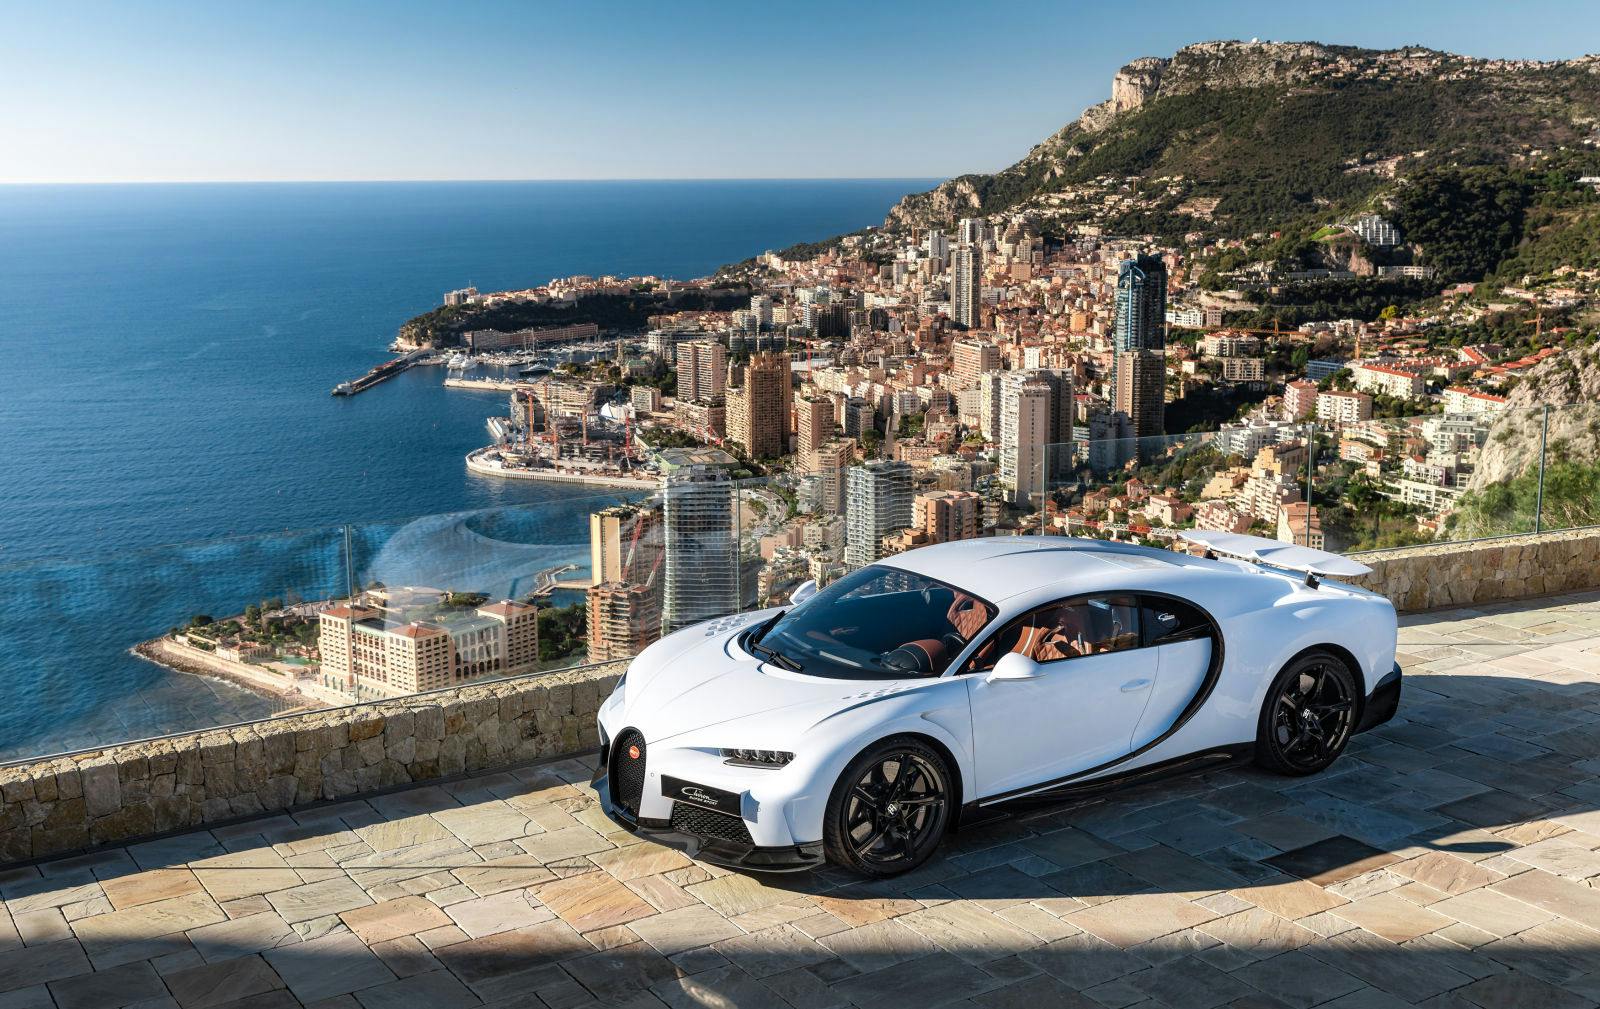 The Bugatti Chiron Super Sport in Monaco, a jewel in the crown of the French Riviera situated at the very apex of European luxury.